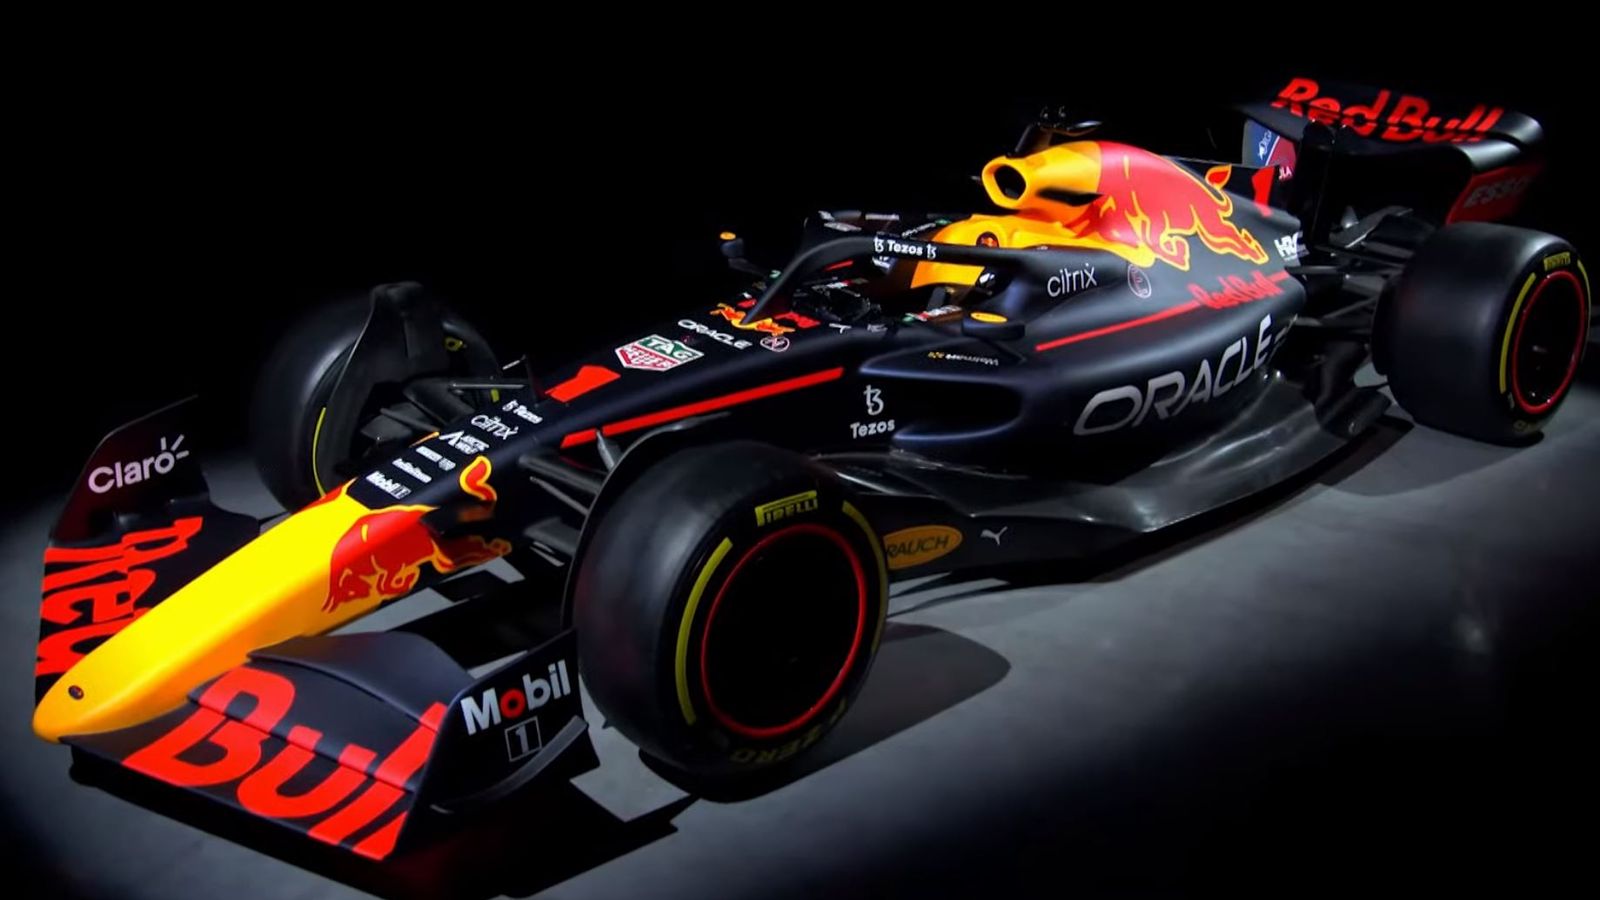 Red Bull reveal new car and title sponsor as team launch RB18B, Max Verstappen’s next title hopeful